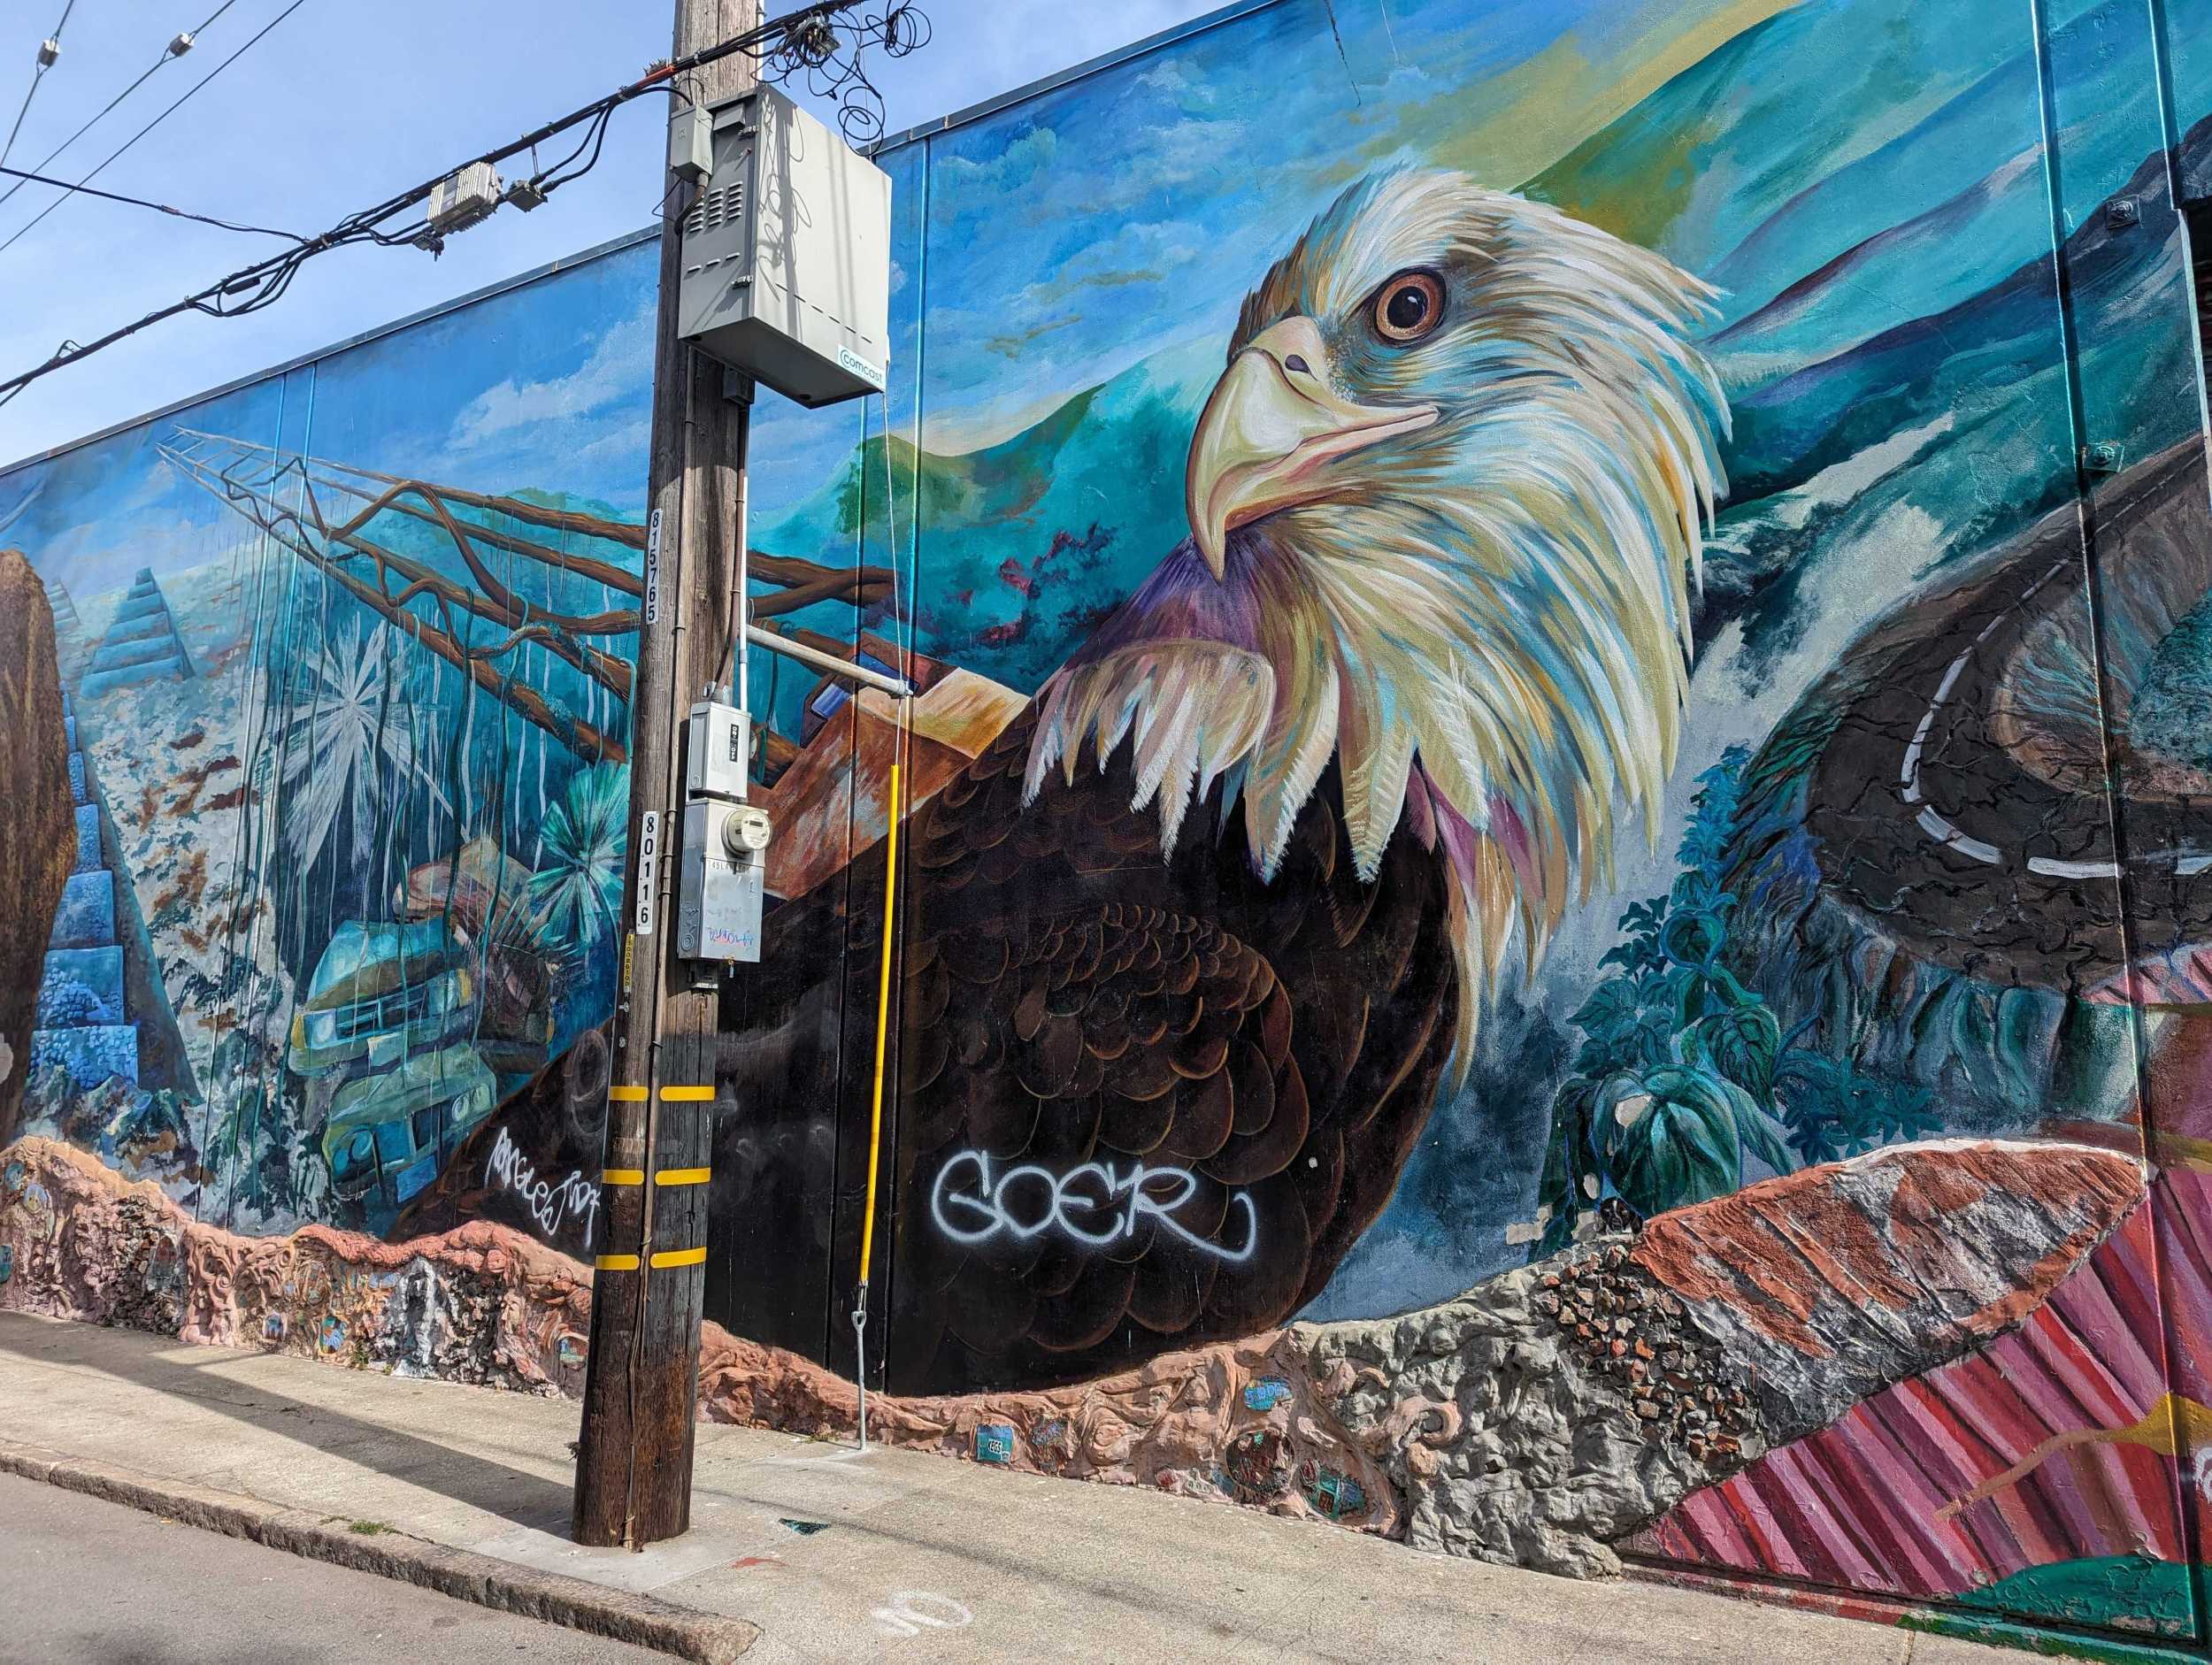 On a Langton Street wall south of Folsom Street in San Francisco's South of Market neighborhood, a gray-spray painted graffiti tag mars a bald eagle's plumage in a neighborhood mural.